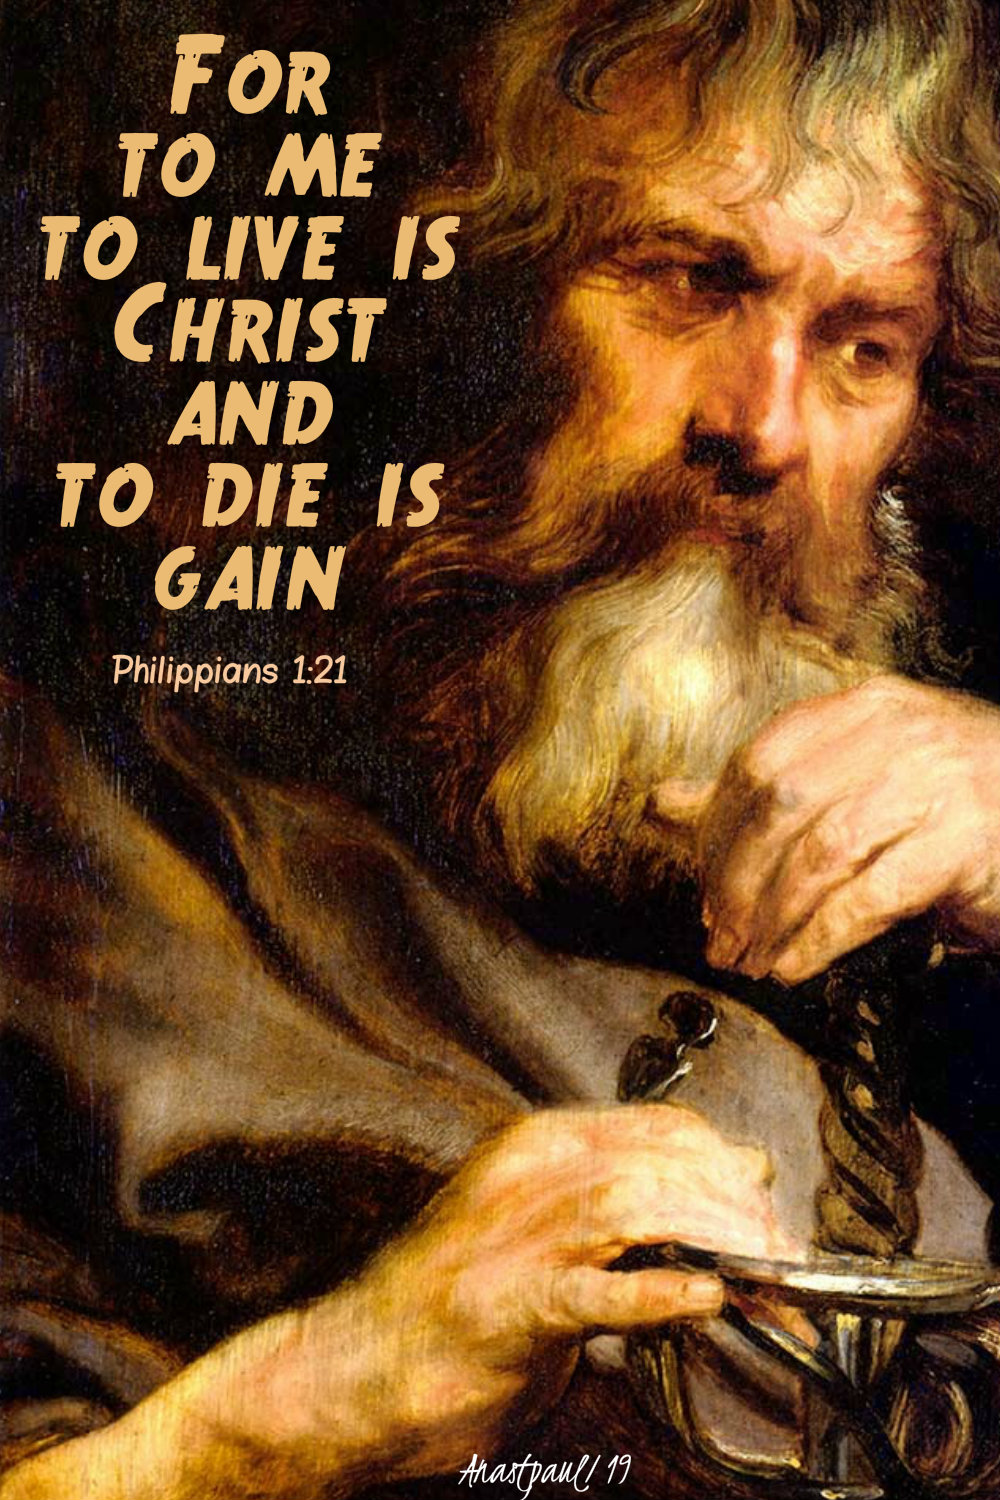 philippians 1 21 for to me to live is christ st paul - 25jan2019.jpg